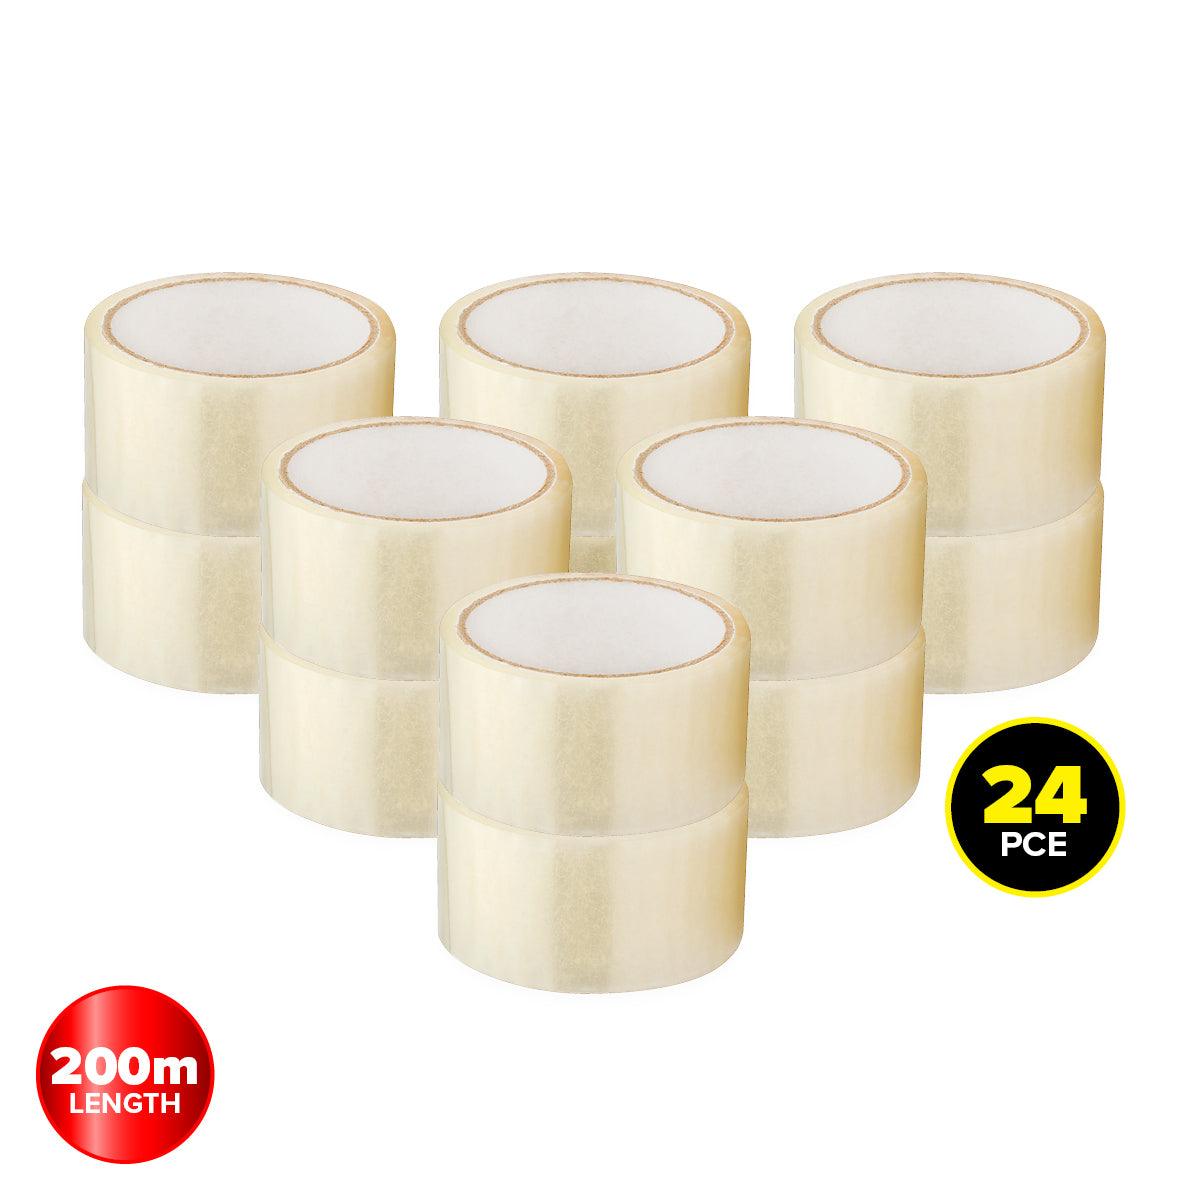 Handy Hardware 24PCE Packaging Tape Clear Multipurpose 200m x 48mm